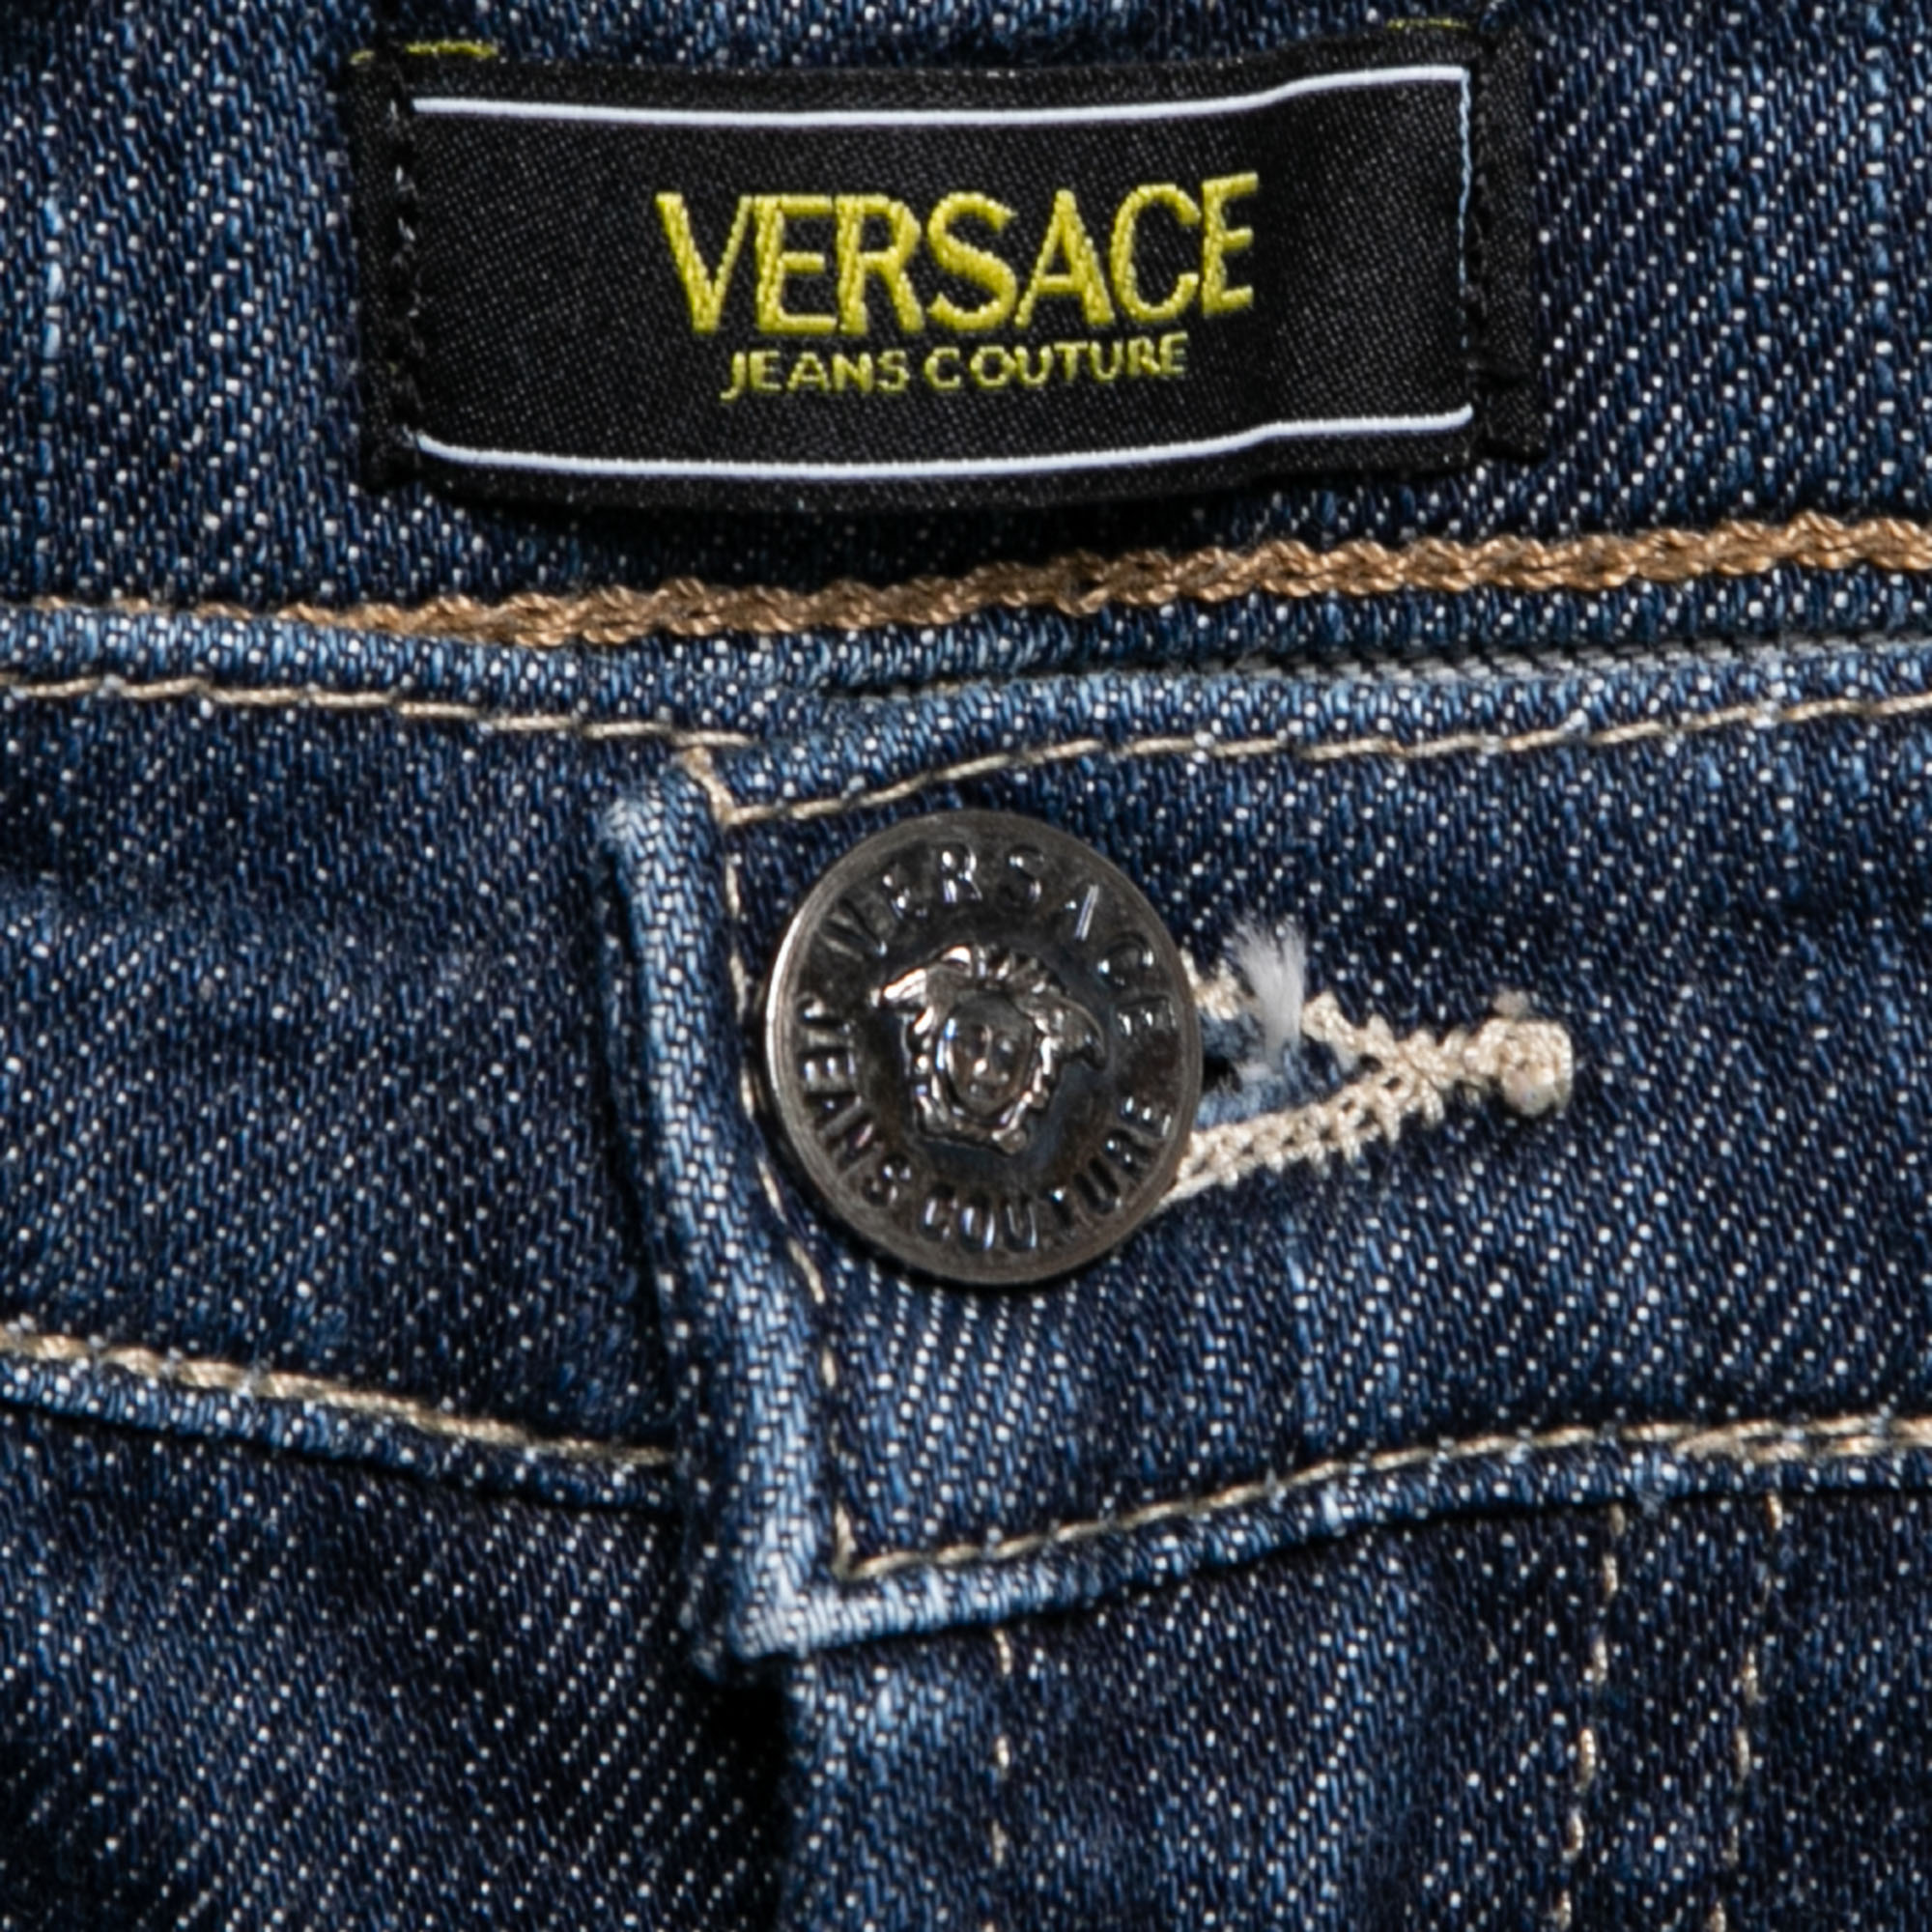 Versace Jeans Couture Blue Denim Tapered Leg Jeans S Waist 28